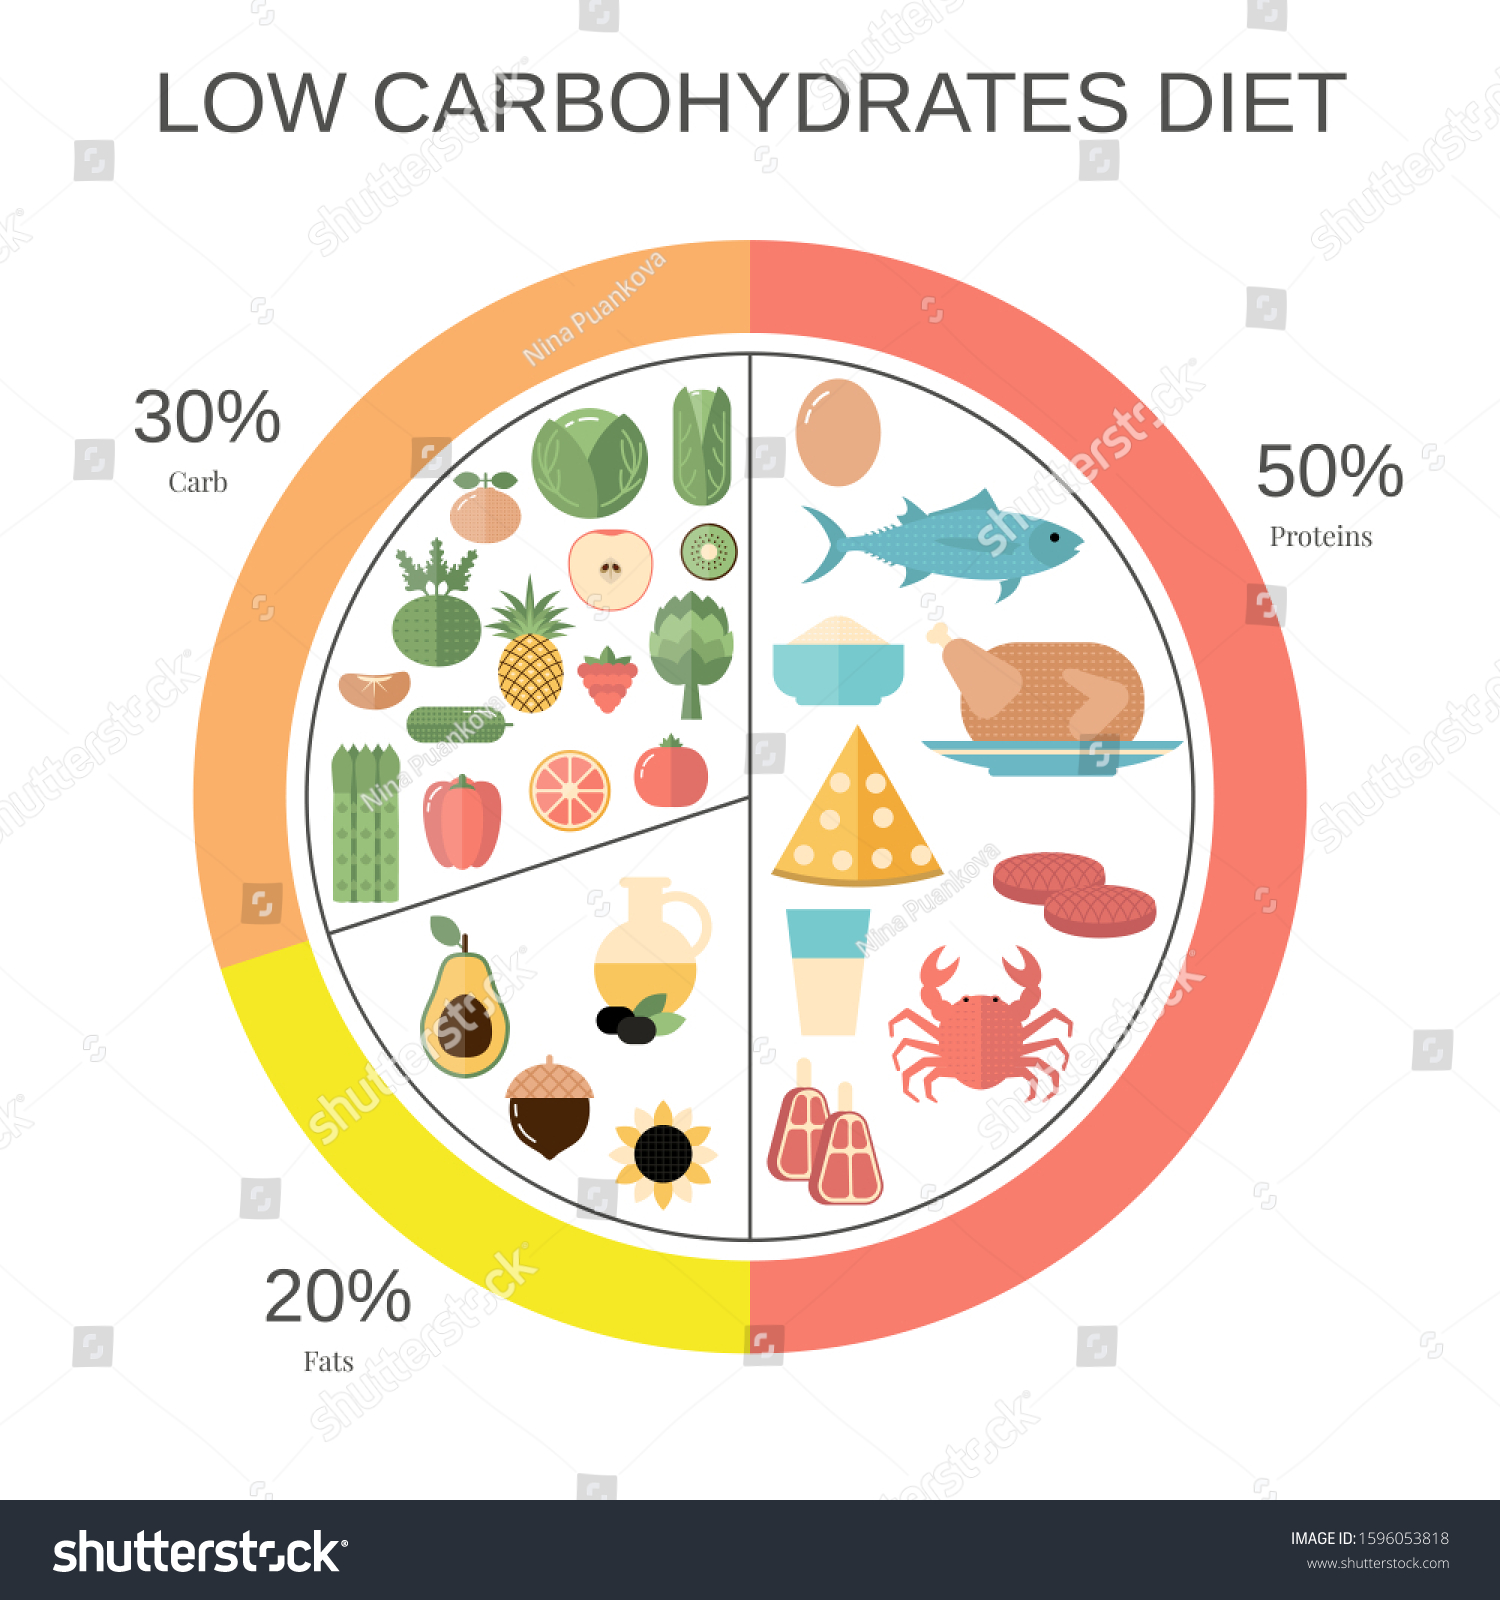 Carbohydrates food